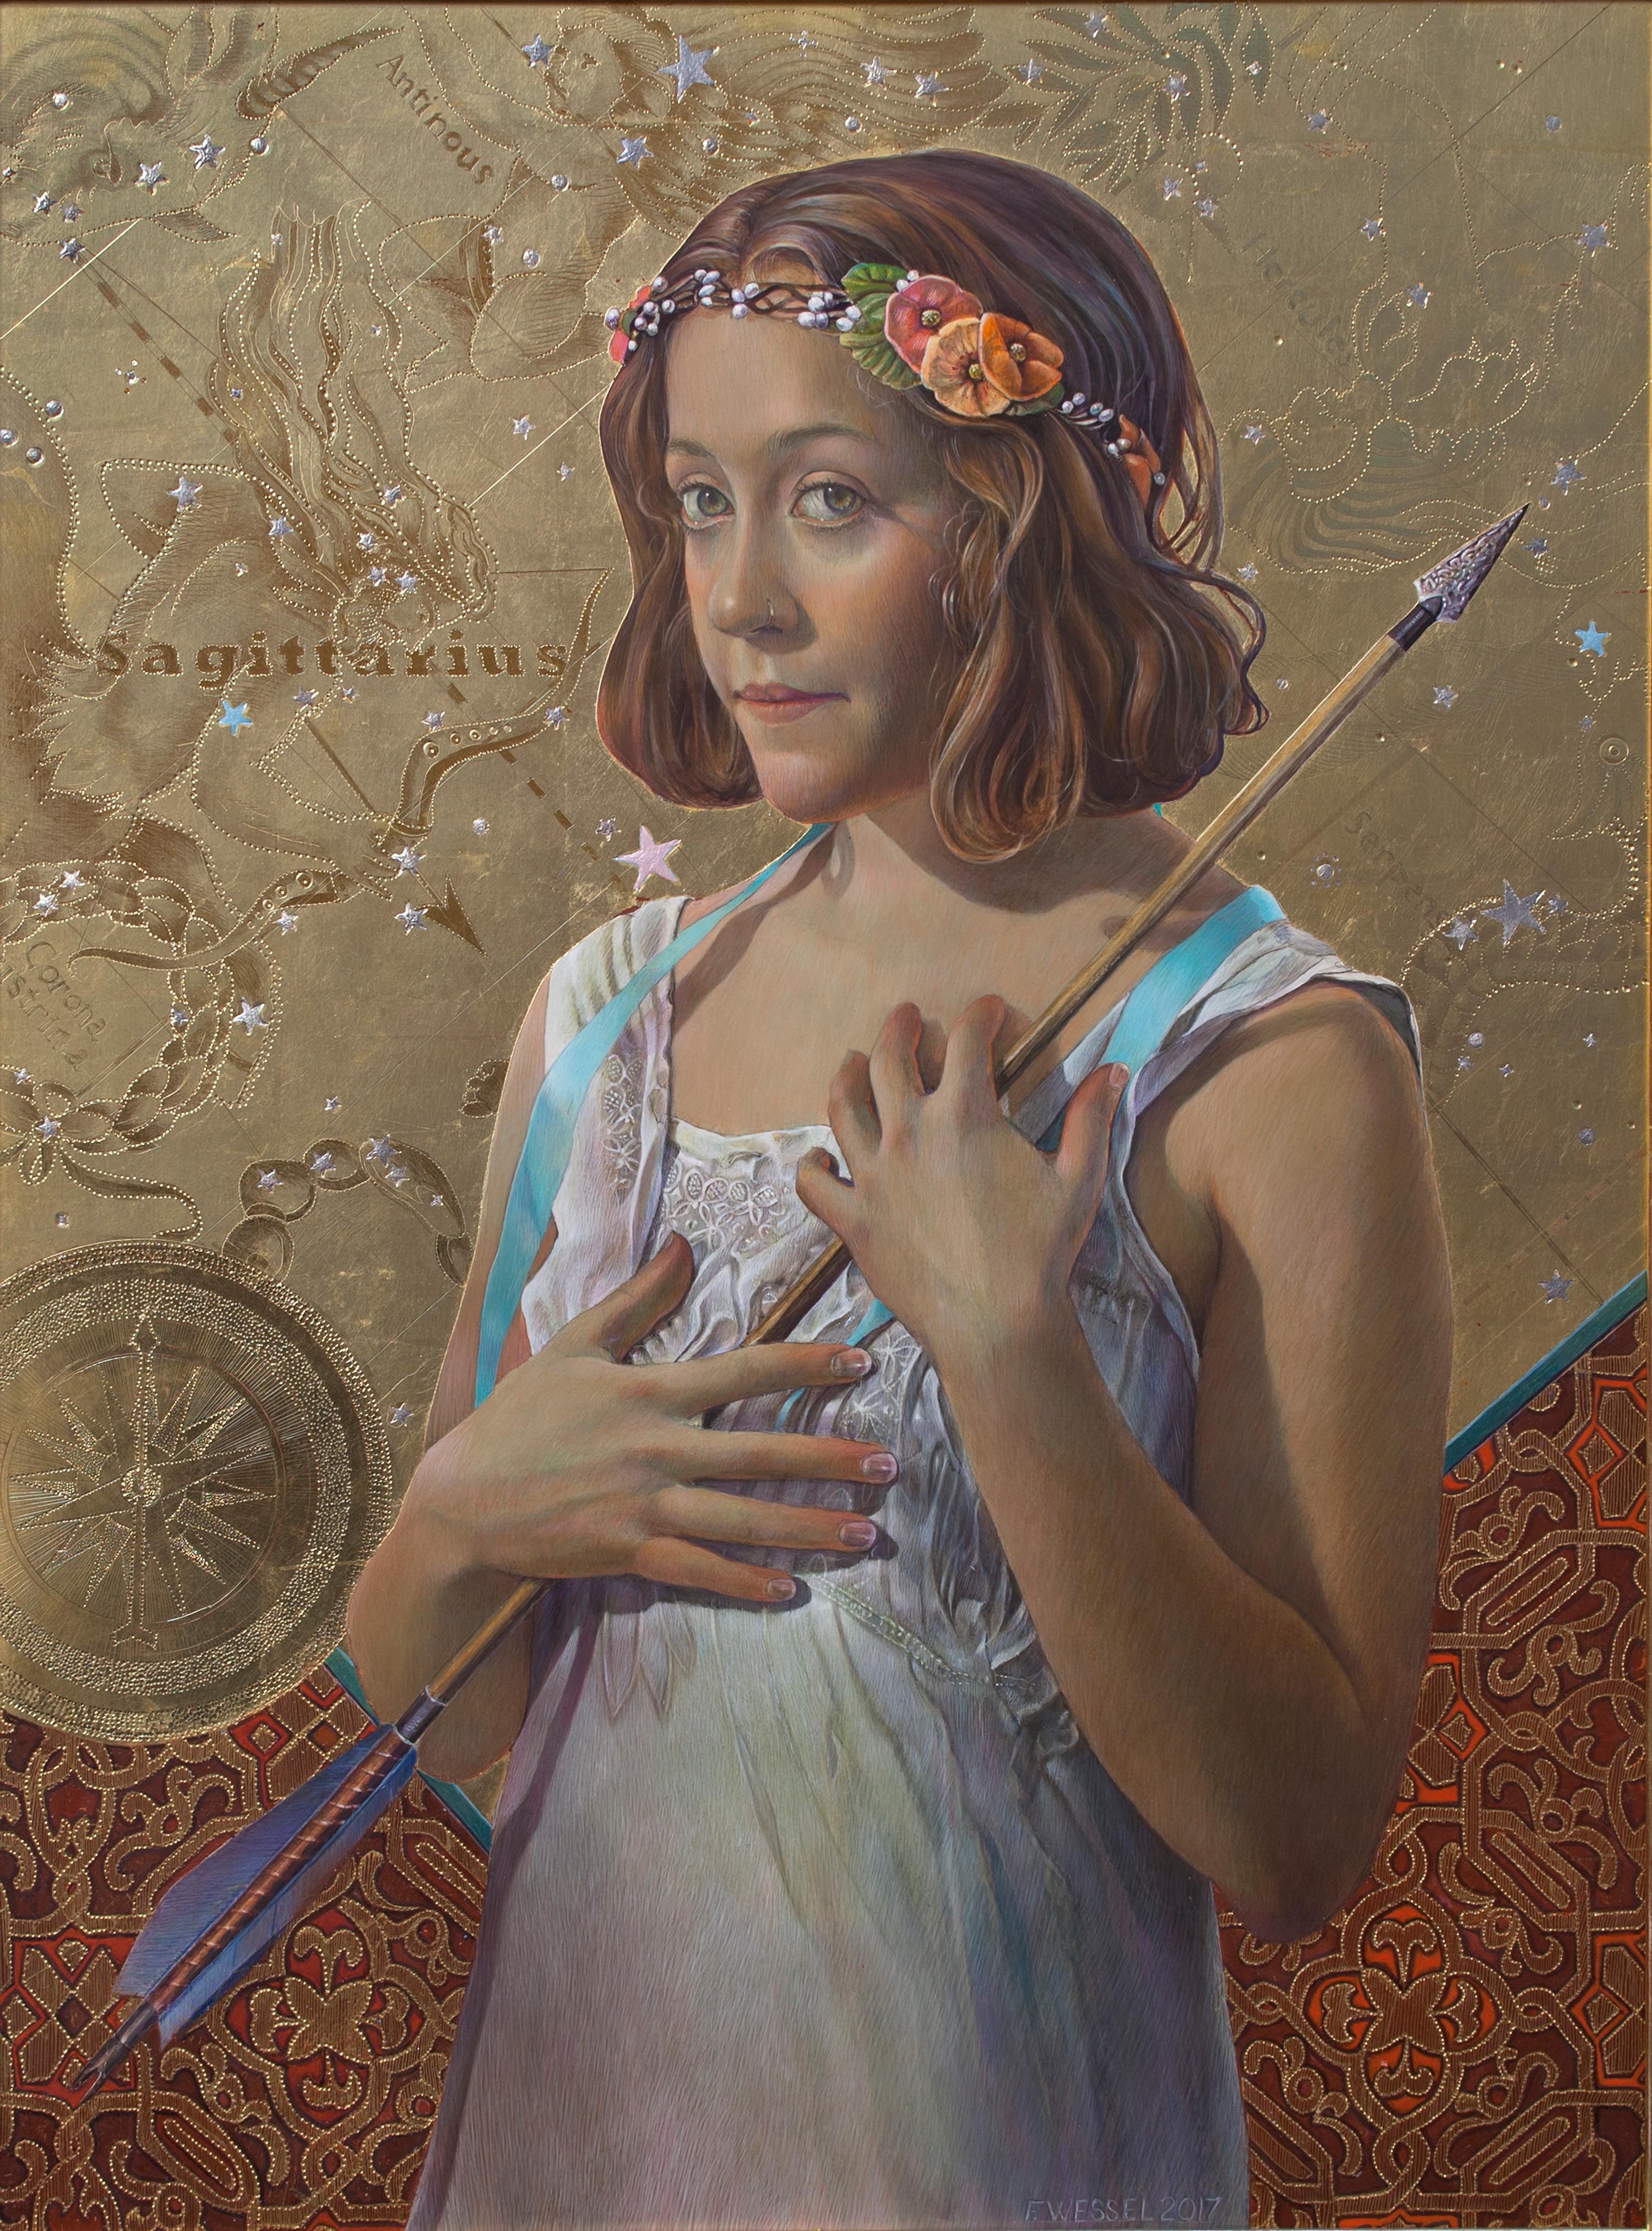 Fred Wessel Portrait Painting - The Constellation Sagittarius, Egg Tempera Painting